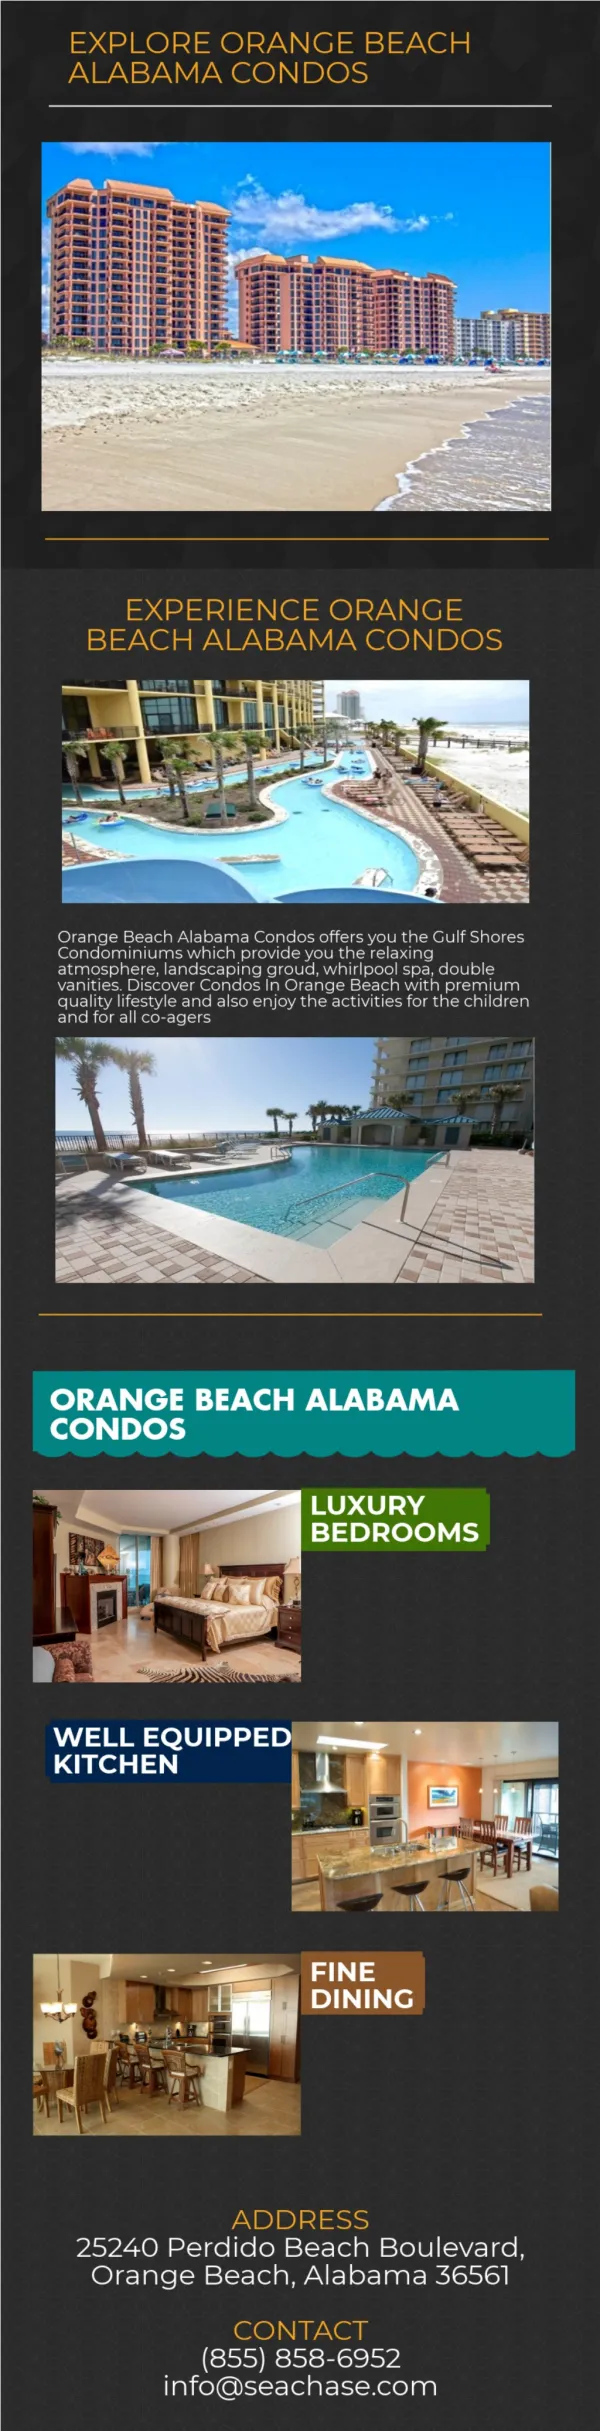 Countinue Your Trip With Gulf Shores Vacation Rentals